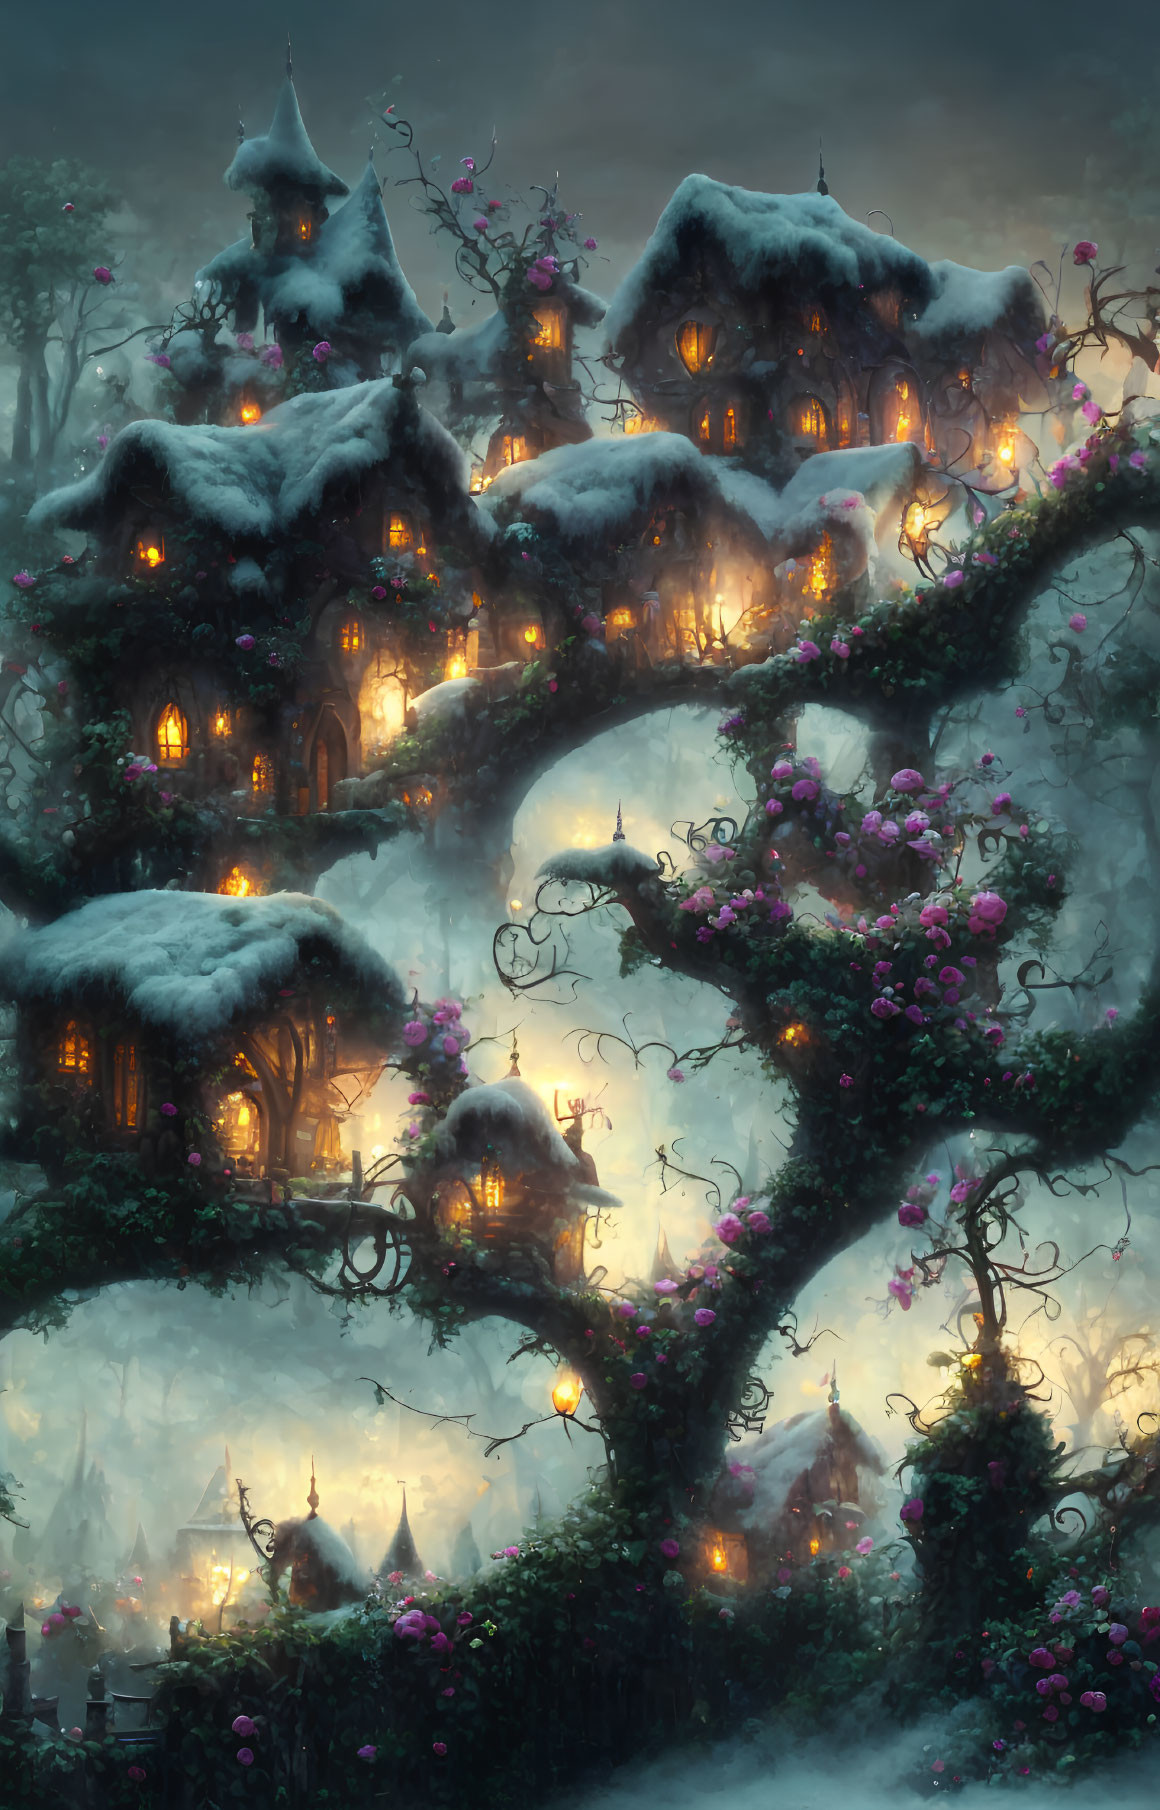 Glowing treehouses in snowy forest with blooming flowers